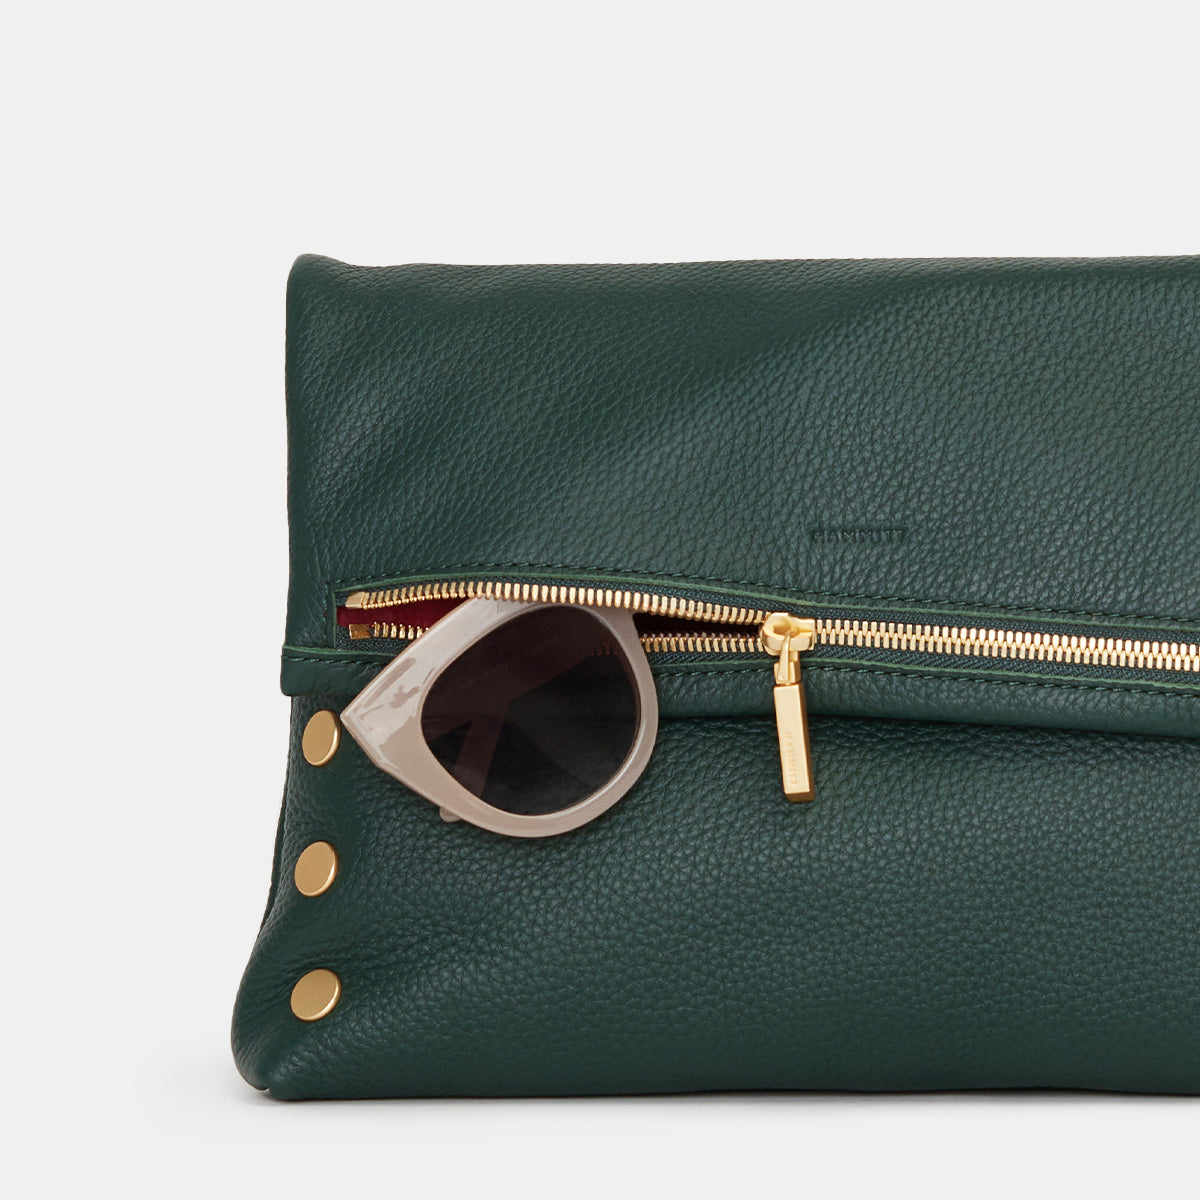 Emerald Suede Leather Clutch Purse Green Leather Bag Leather 